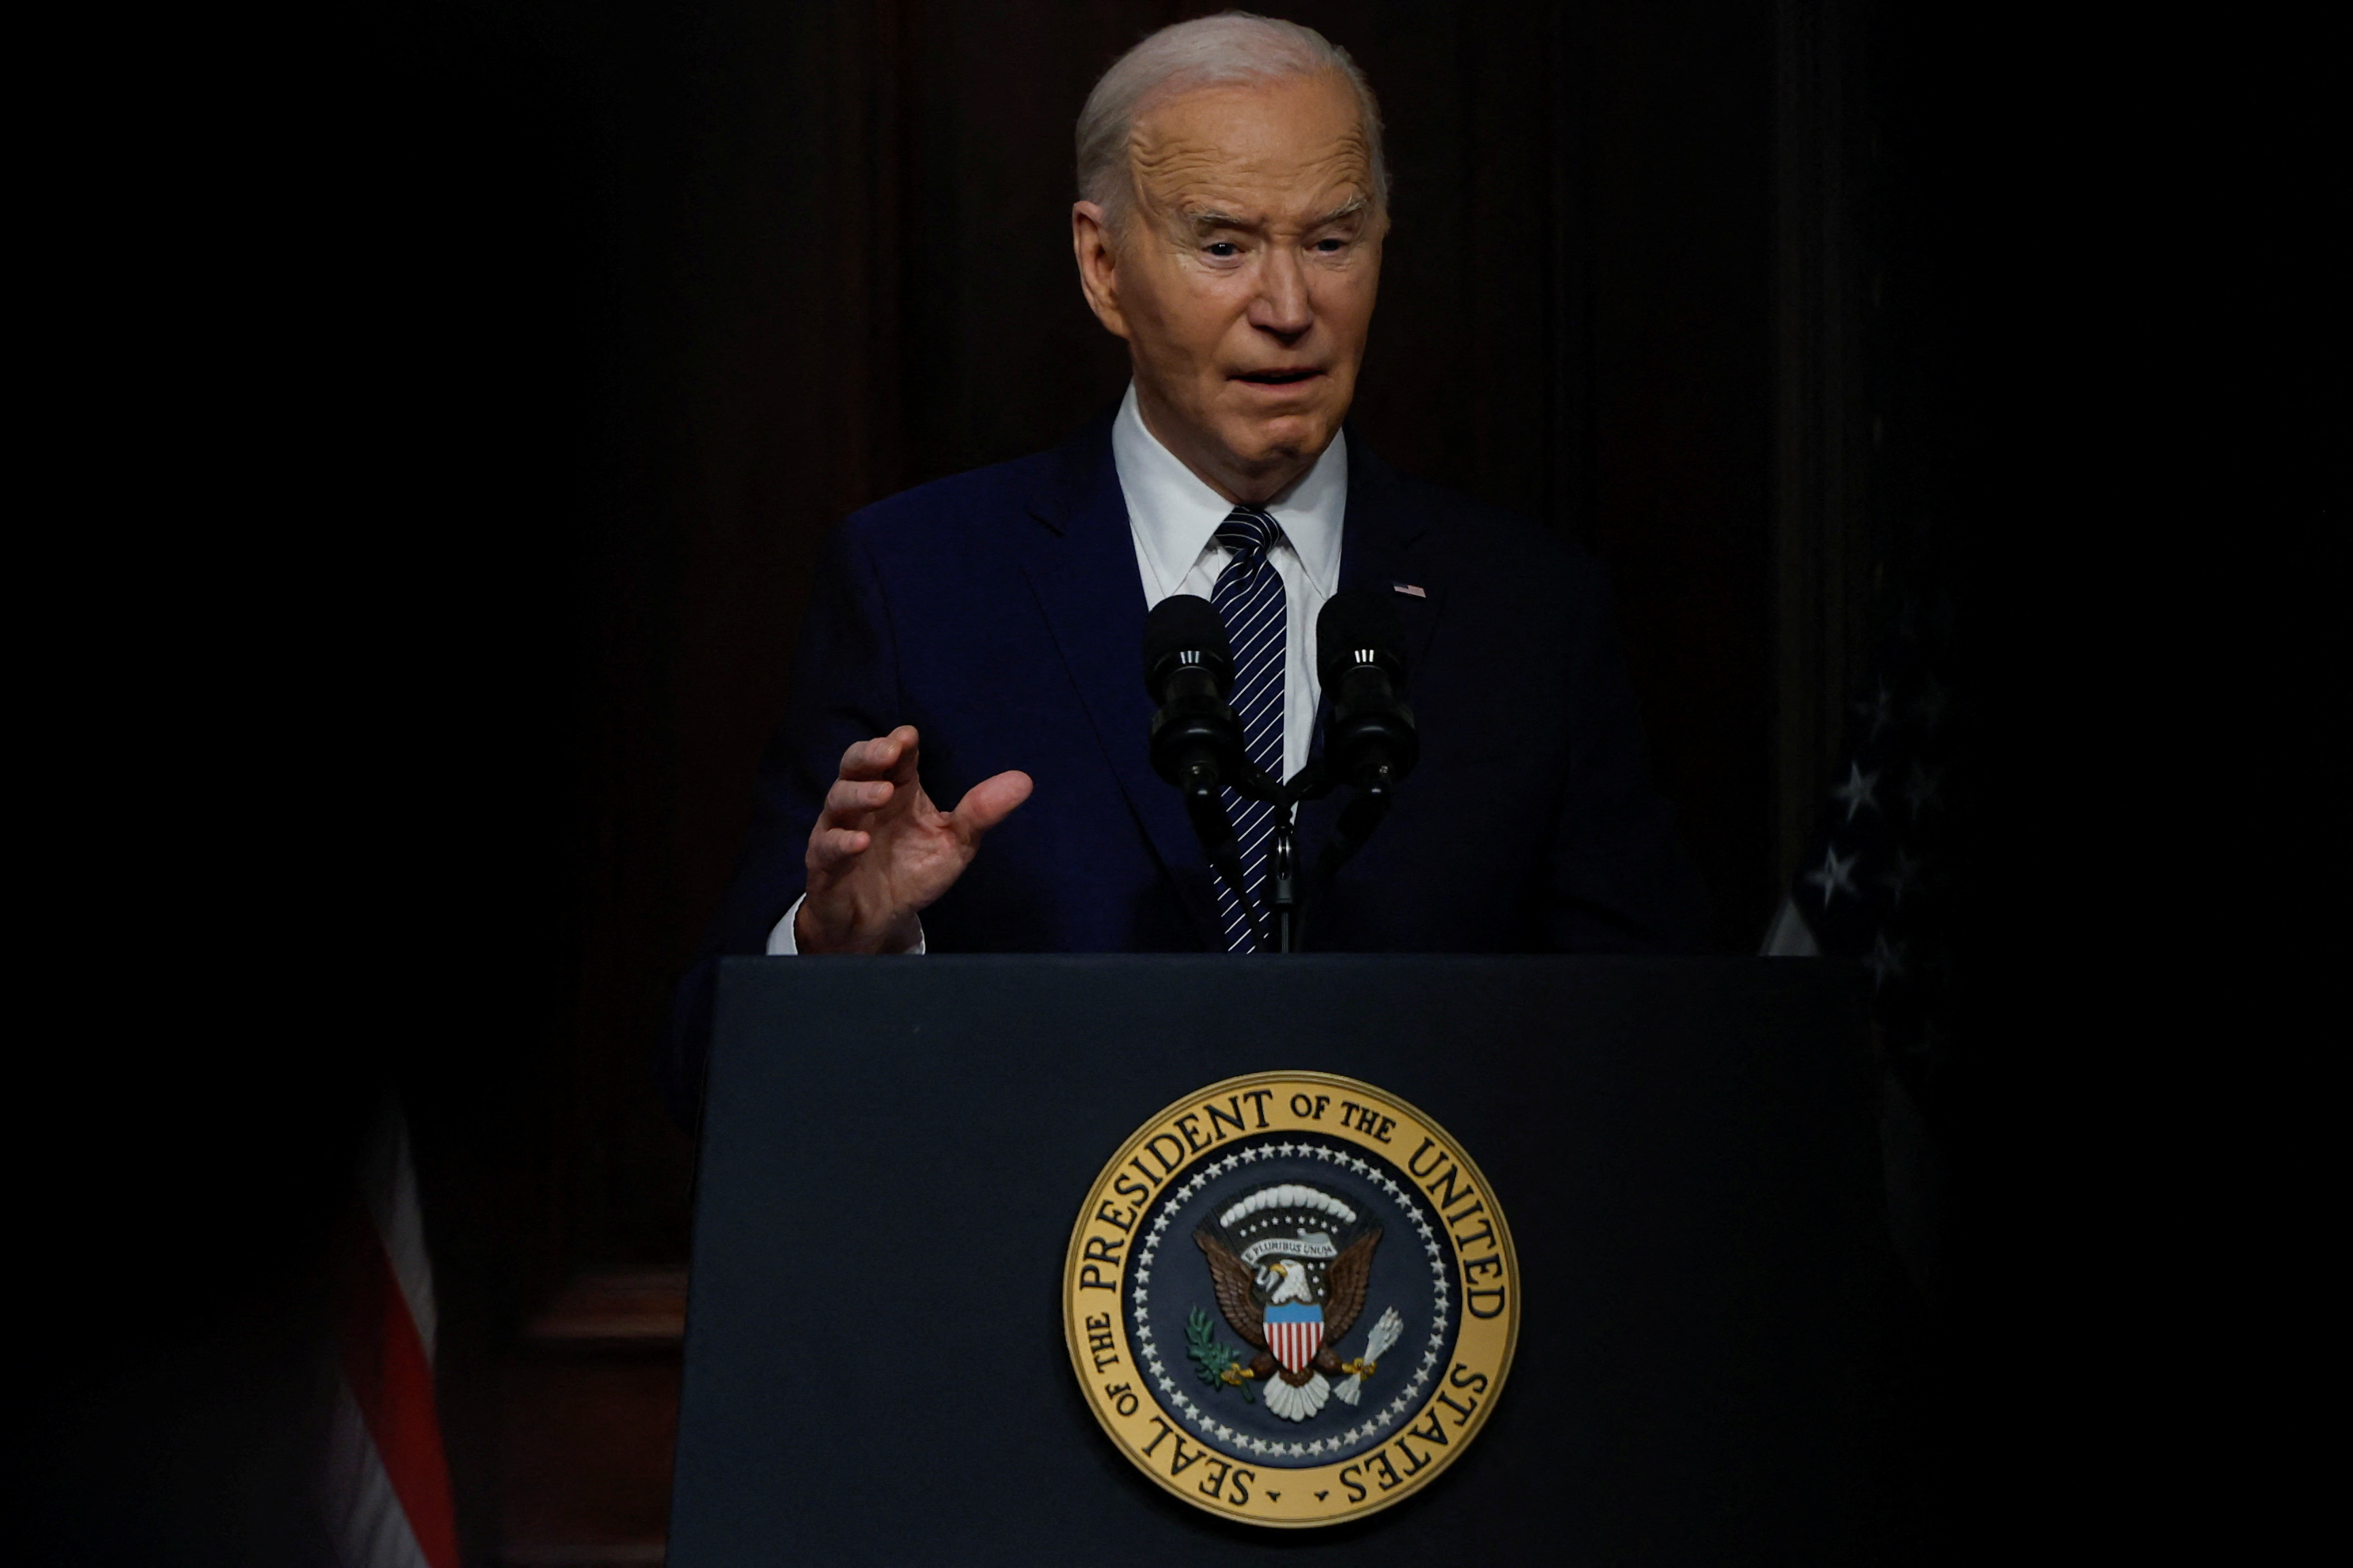 Biden delivers remarks on lowering healthcare costs in Washington